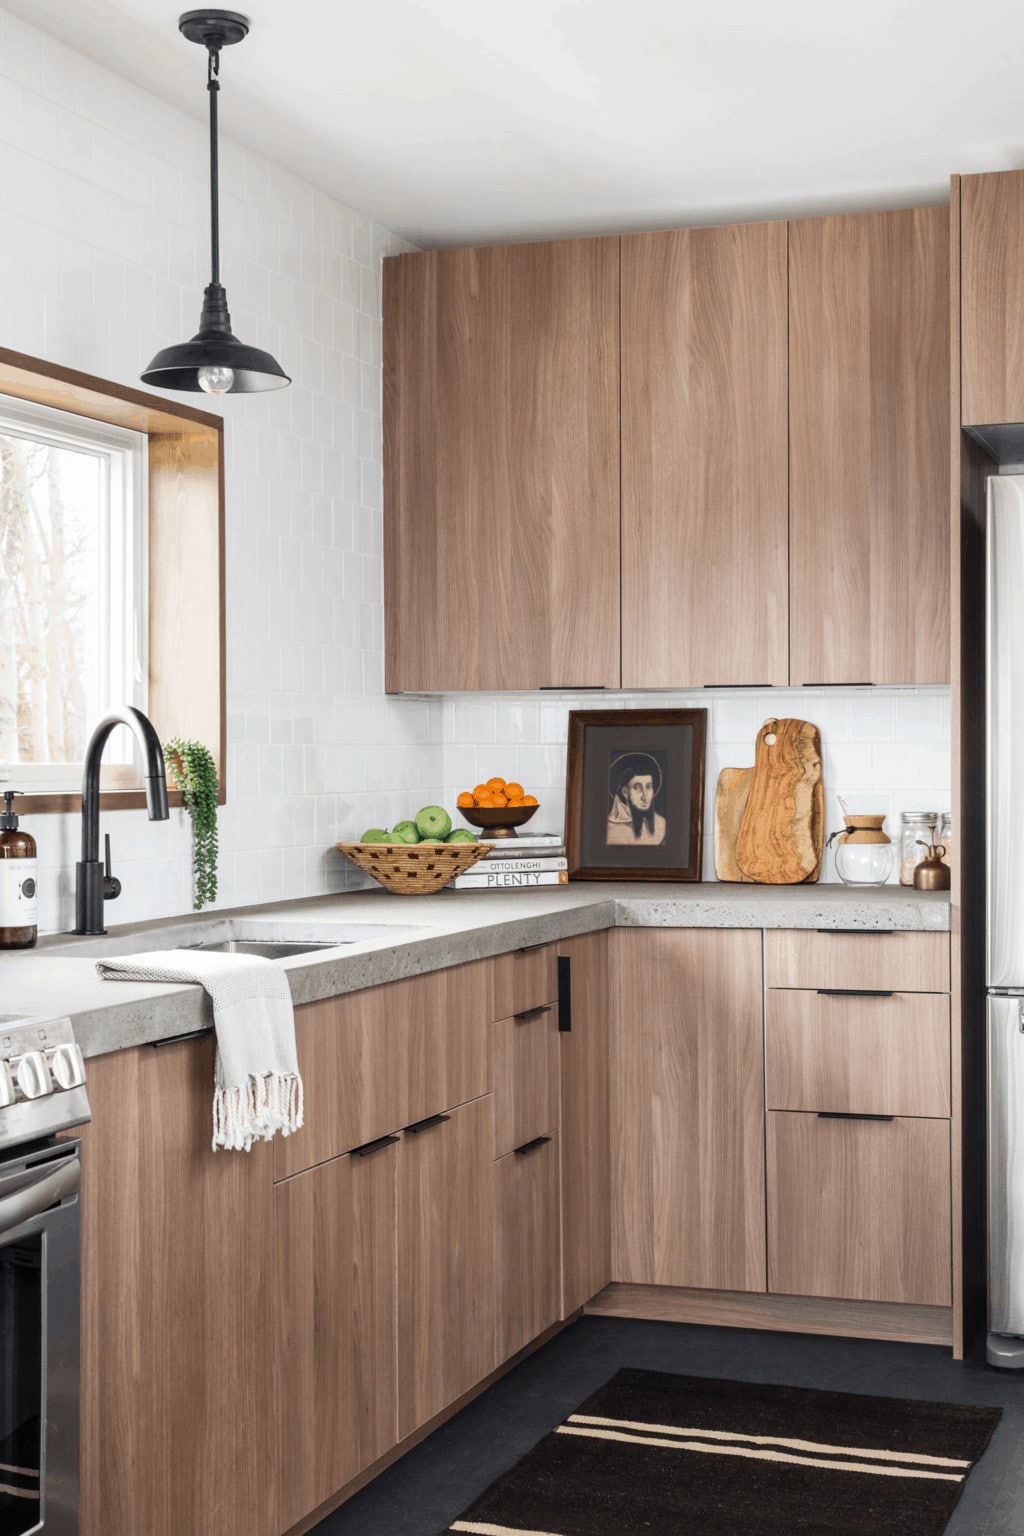 How To Pick Kitchen Hardware – The Ultimate Guide - Erin Zubot Design